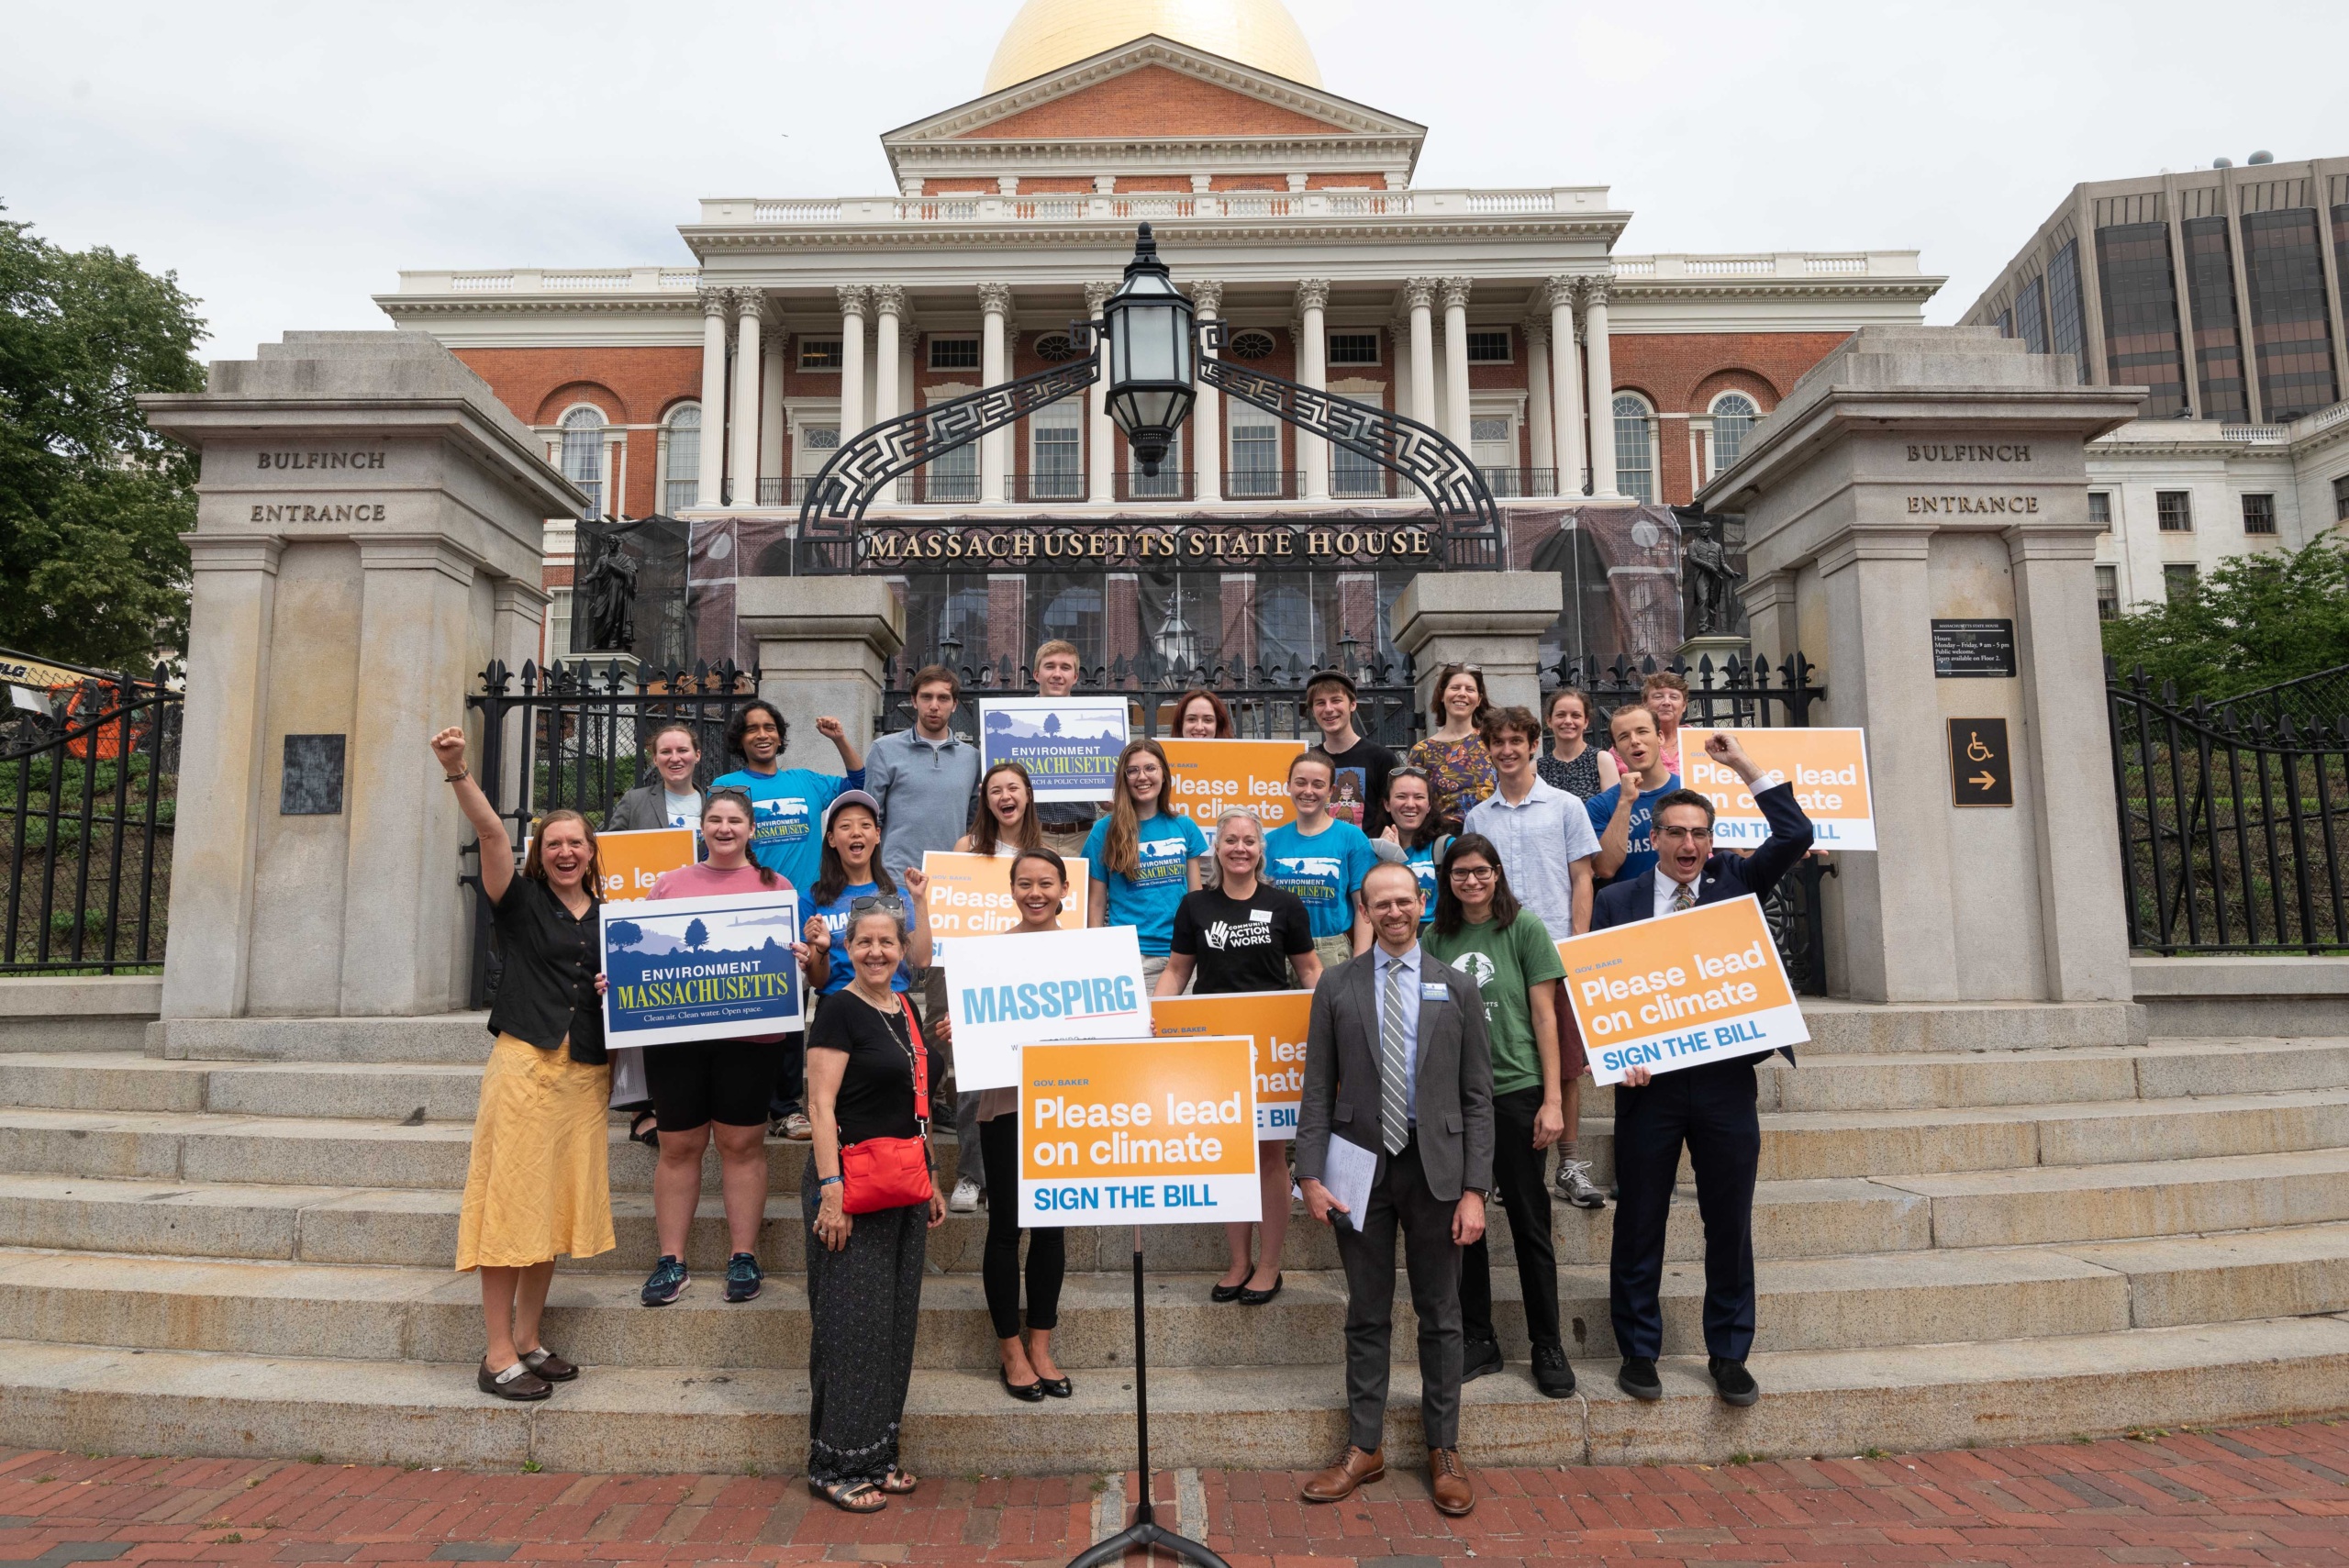 Activists rally on the steps of the Massachusetts State House, holding signs asking the governor to sign a climate bill.